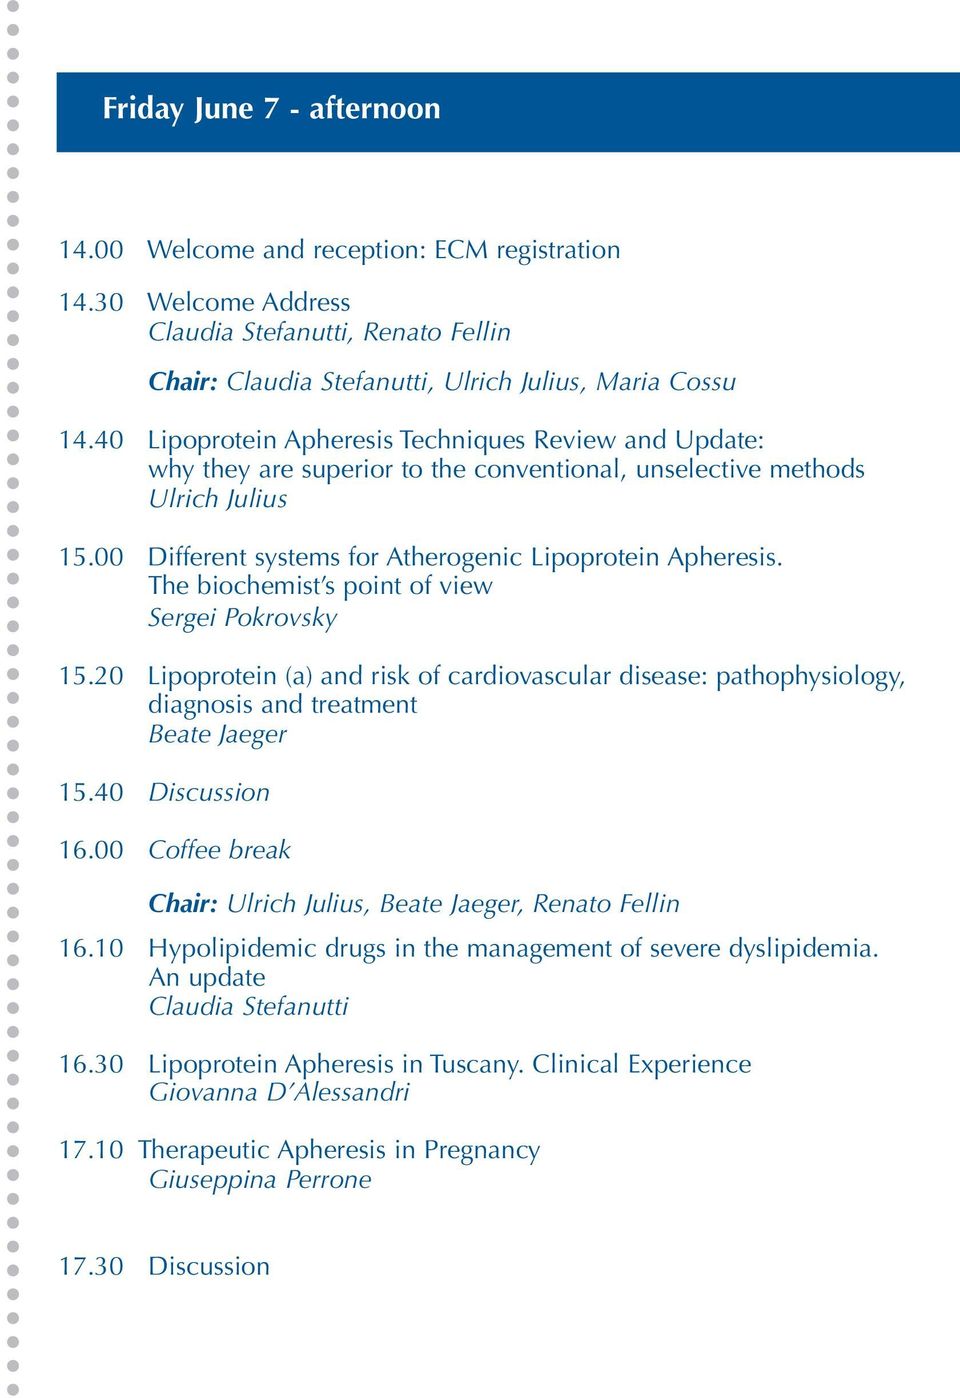 The biochemist s point of view Sergei Pokrovsky 15.20 Lipoprotein (a) and risk of cardiovascular disease: pathophysiology, diagnosis and treatment Beate Jaeger 15.40 Discussion 16.